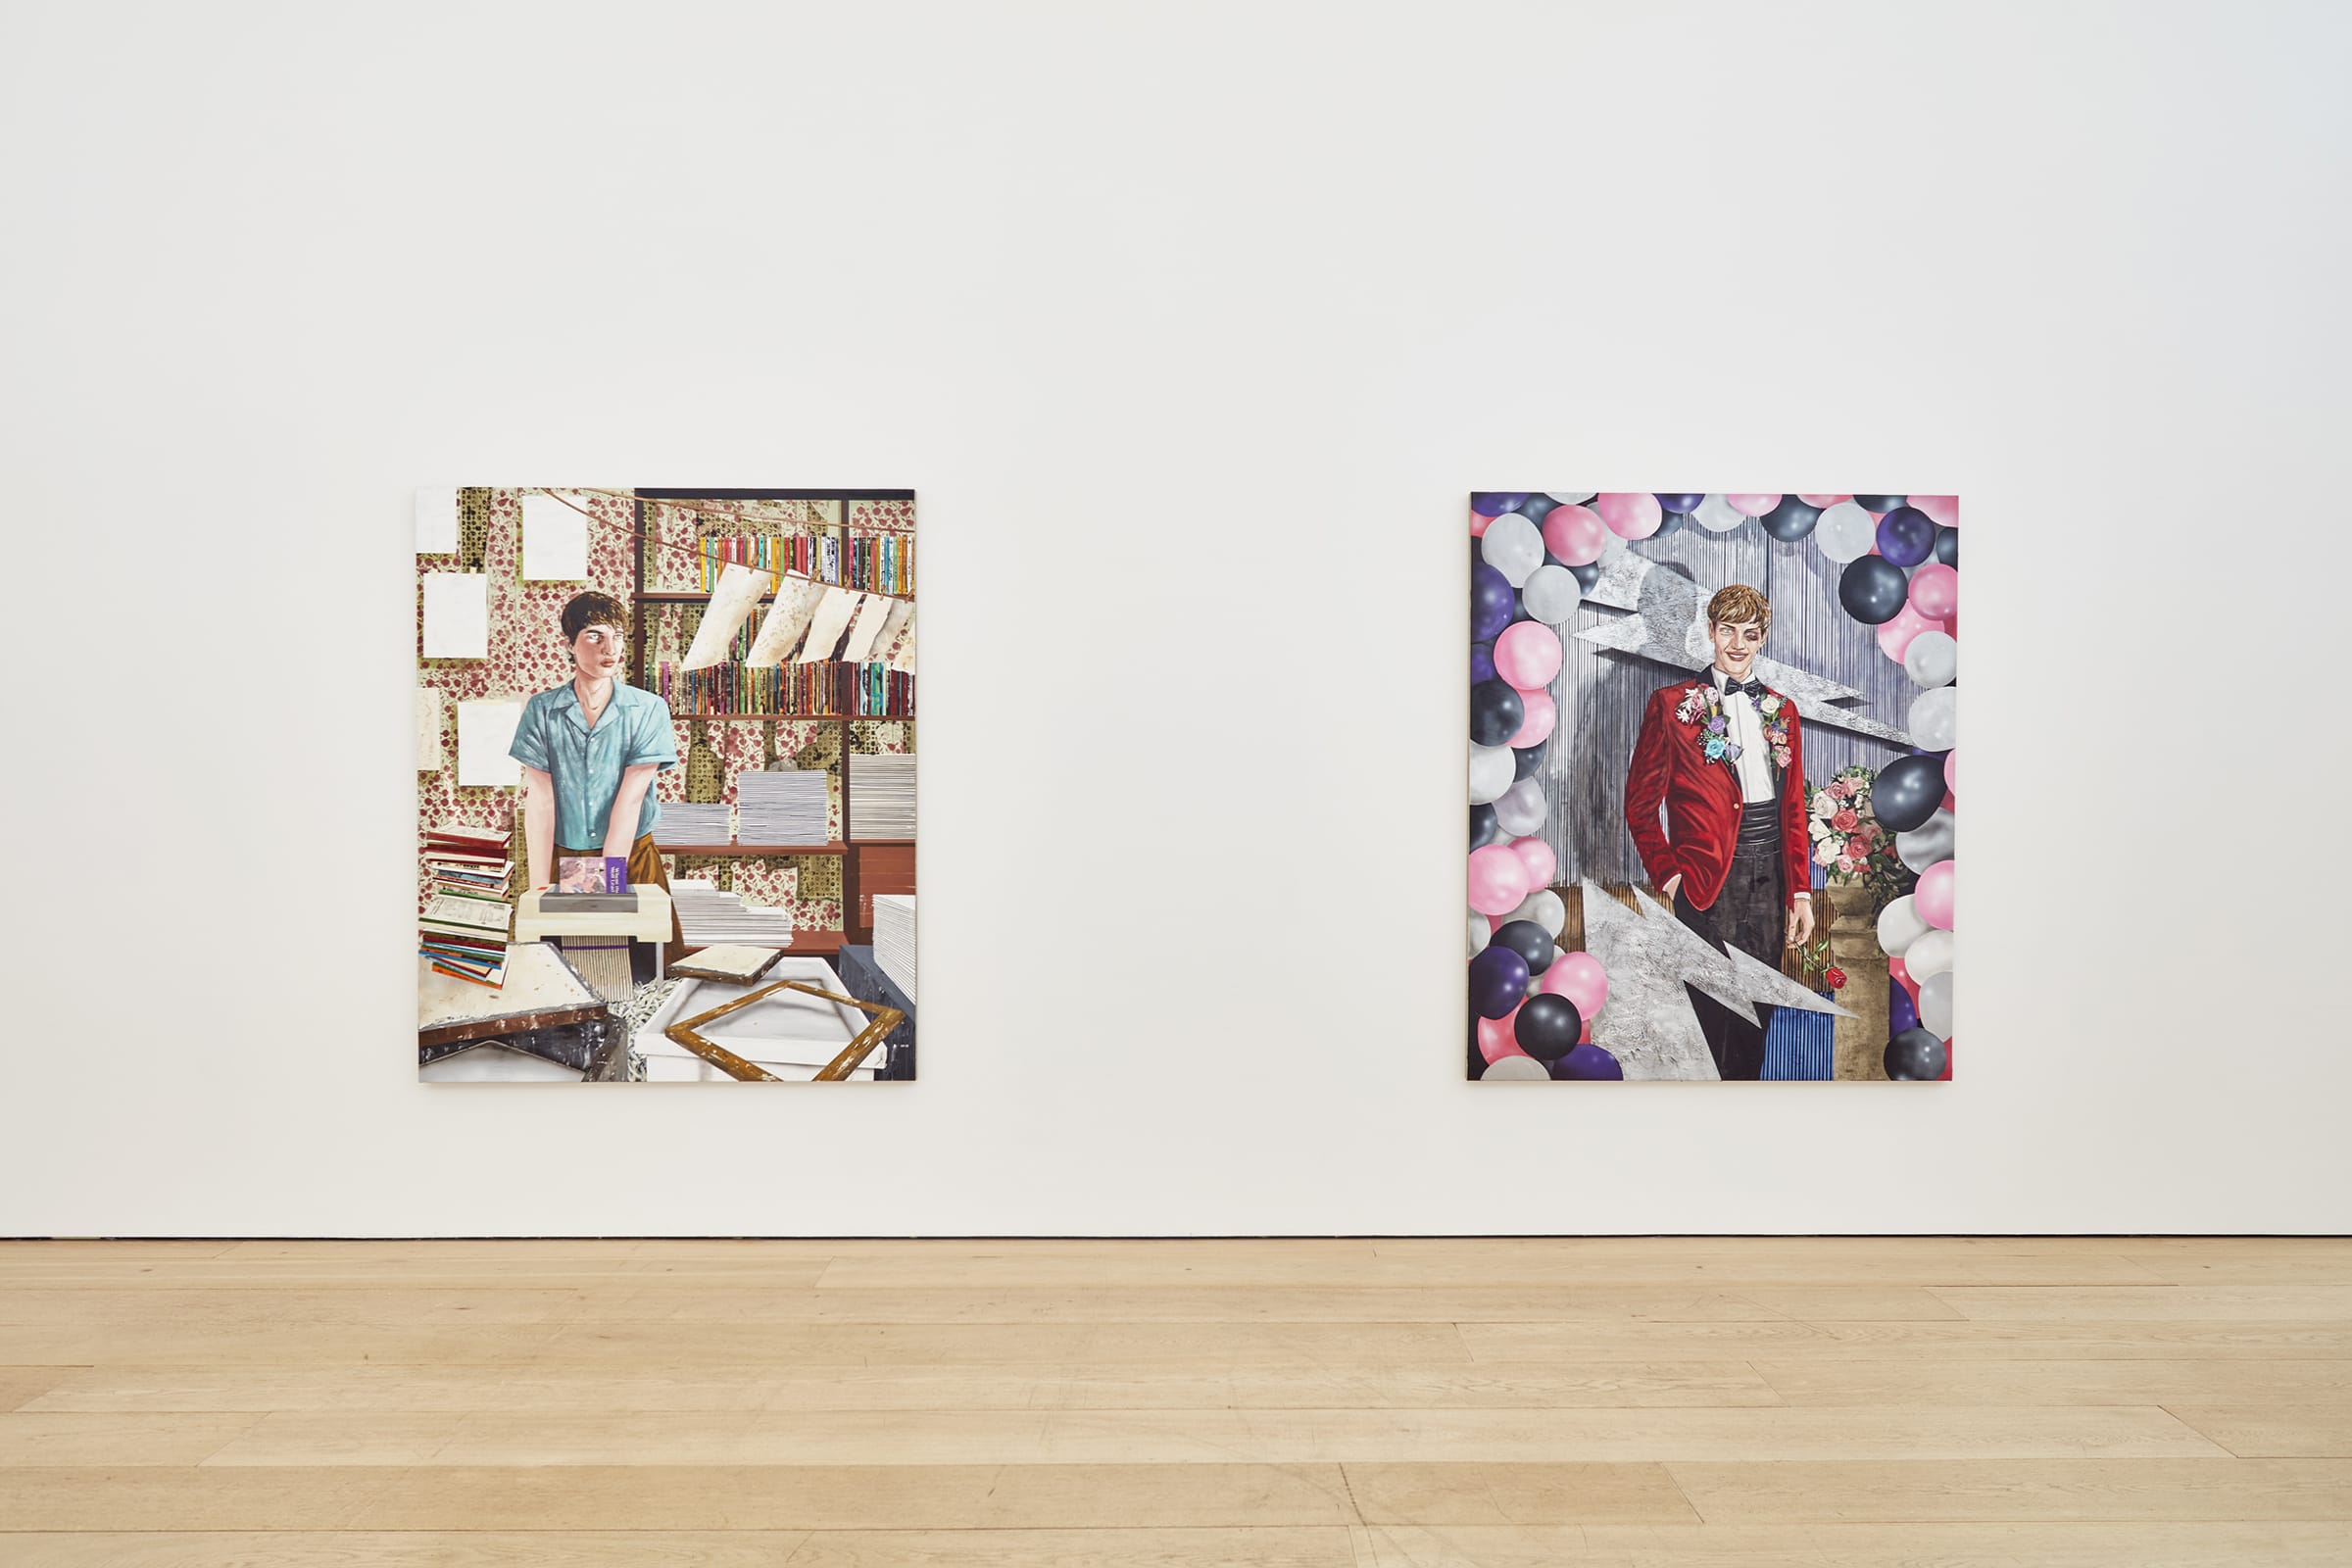 Installation view of Hernan Bas, 'The Conceptualists: Vol. 11', Lehmann Maupin, New York City, 2023. Photograph by Matthew Herrmann. Courtesy of the artist and Lehmann Maupin.